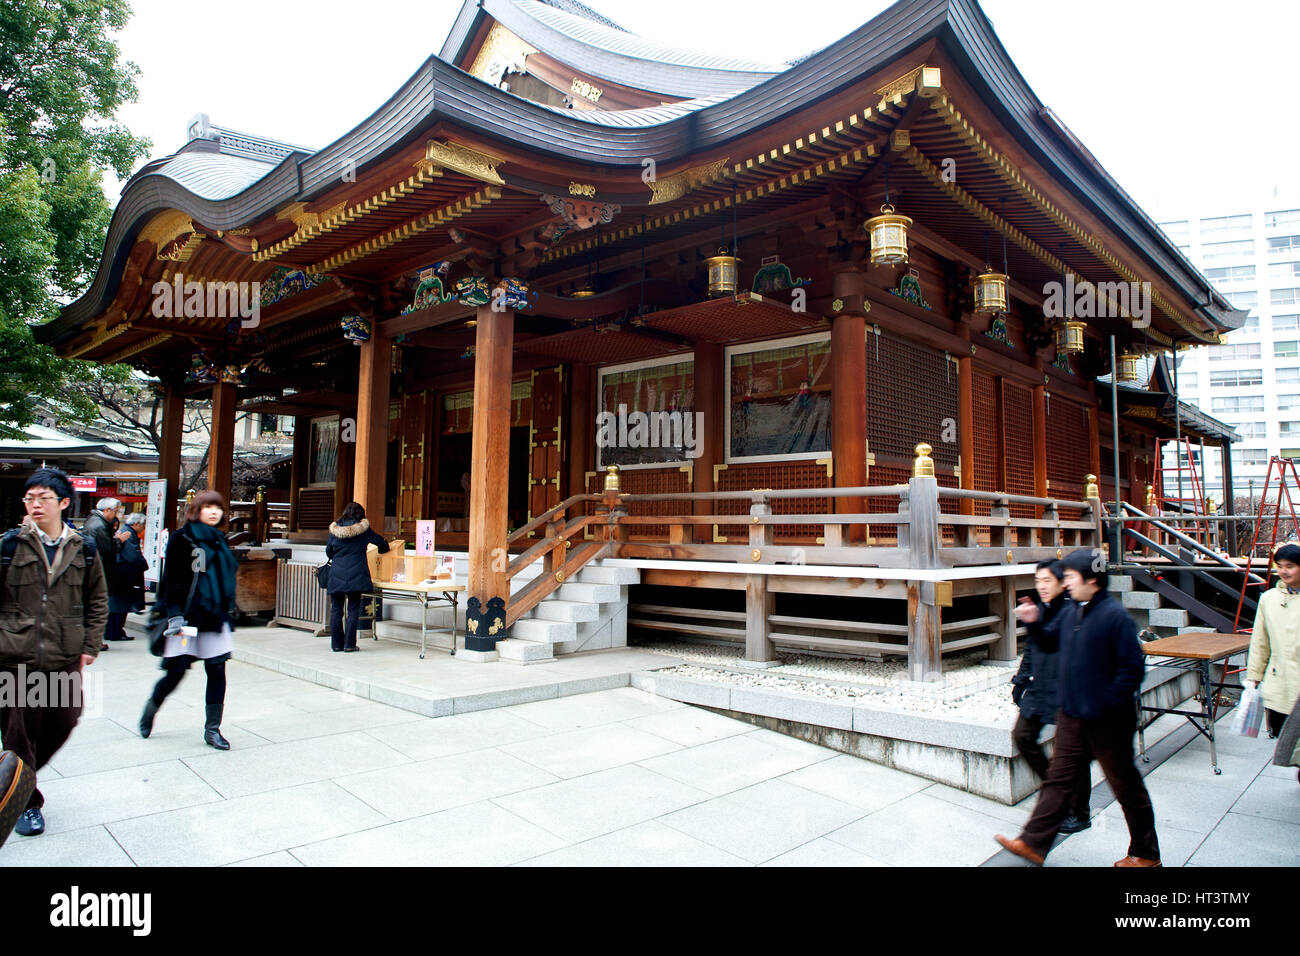 Yushima Tenmangu Shinto shrine, located in the Bunkyo neighborhood of Tokyo, Japan. It is a favorite site for students praying for success in exams. Stock Photo